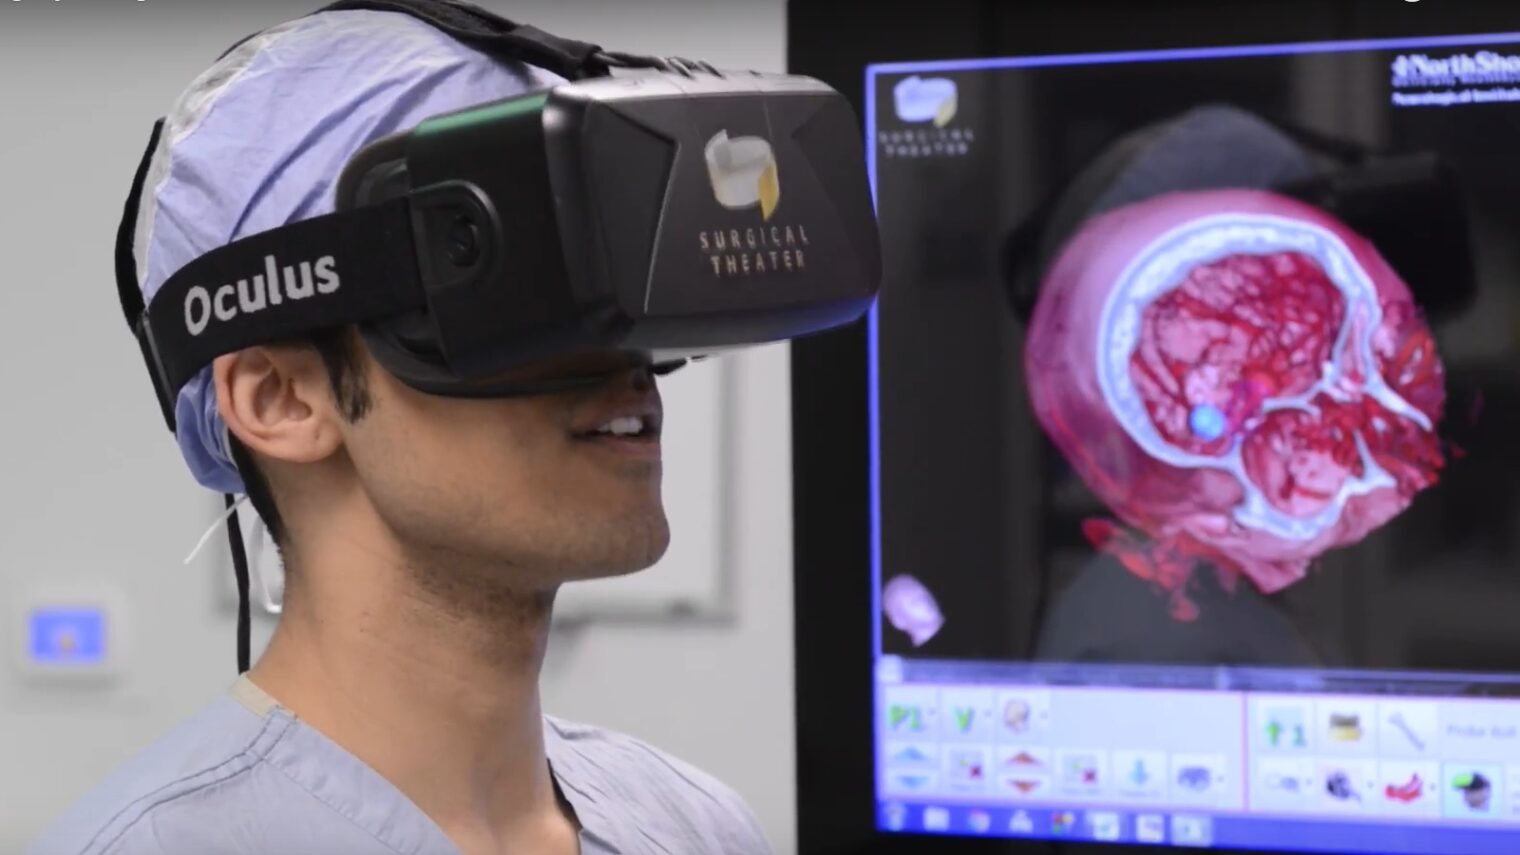 Surgical Theater’s VR platform lets doctors and patients see inside the brain and prepare for surgery.